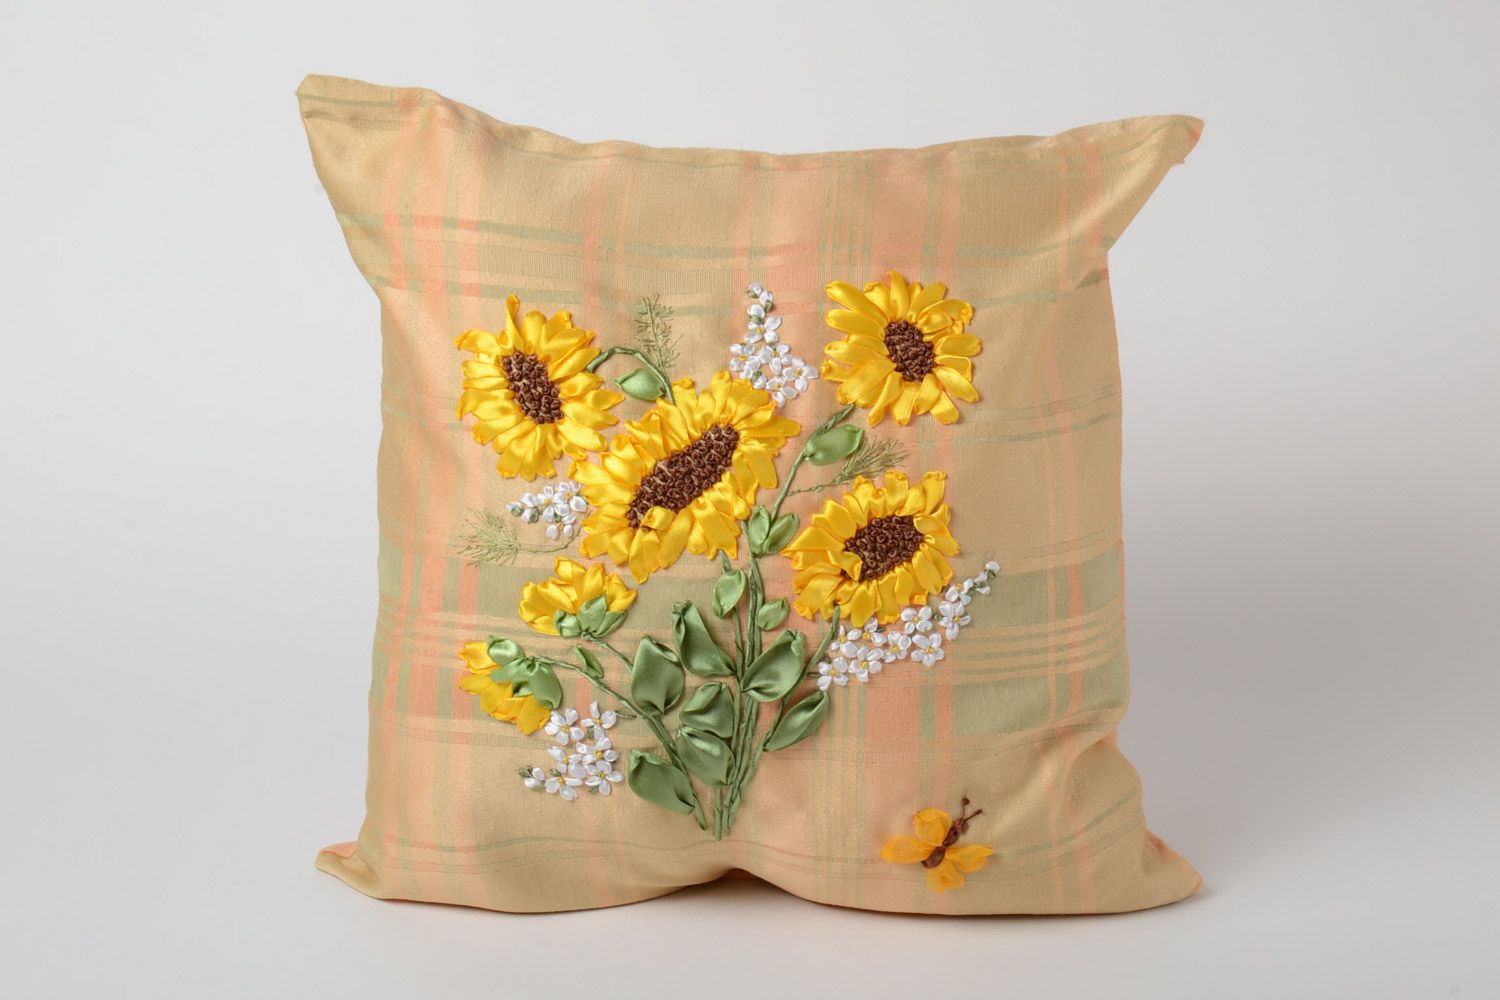 Handmade satin ribbon embroidery pillow case with flowers and button photo 1